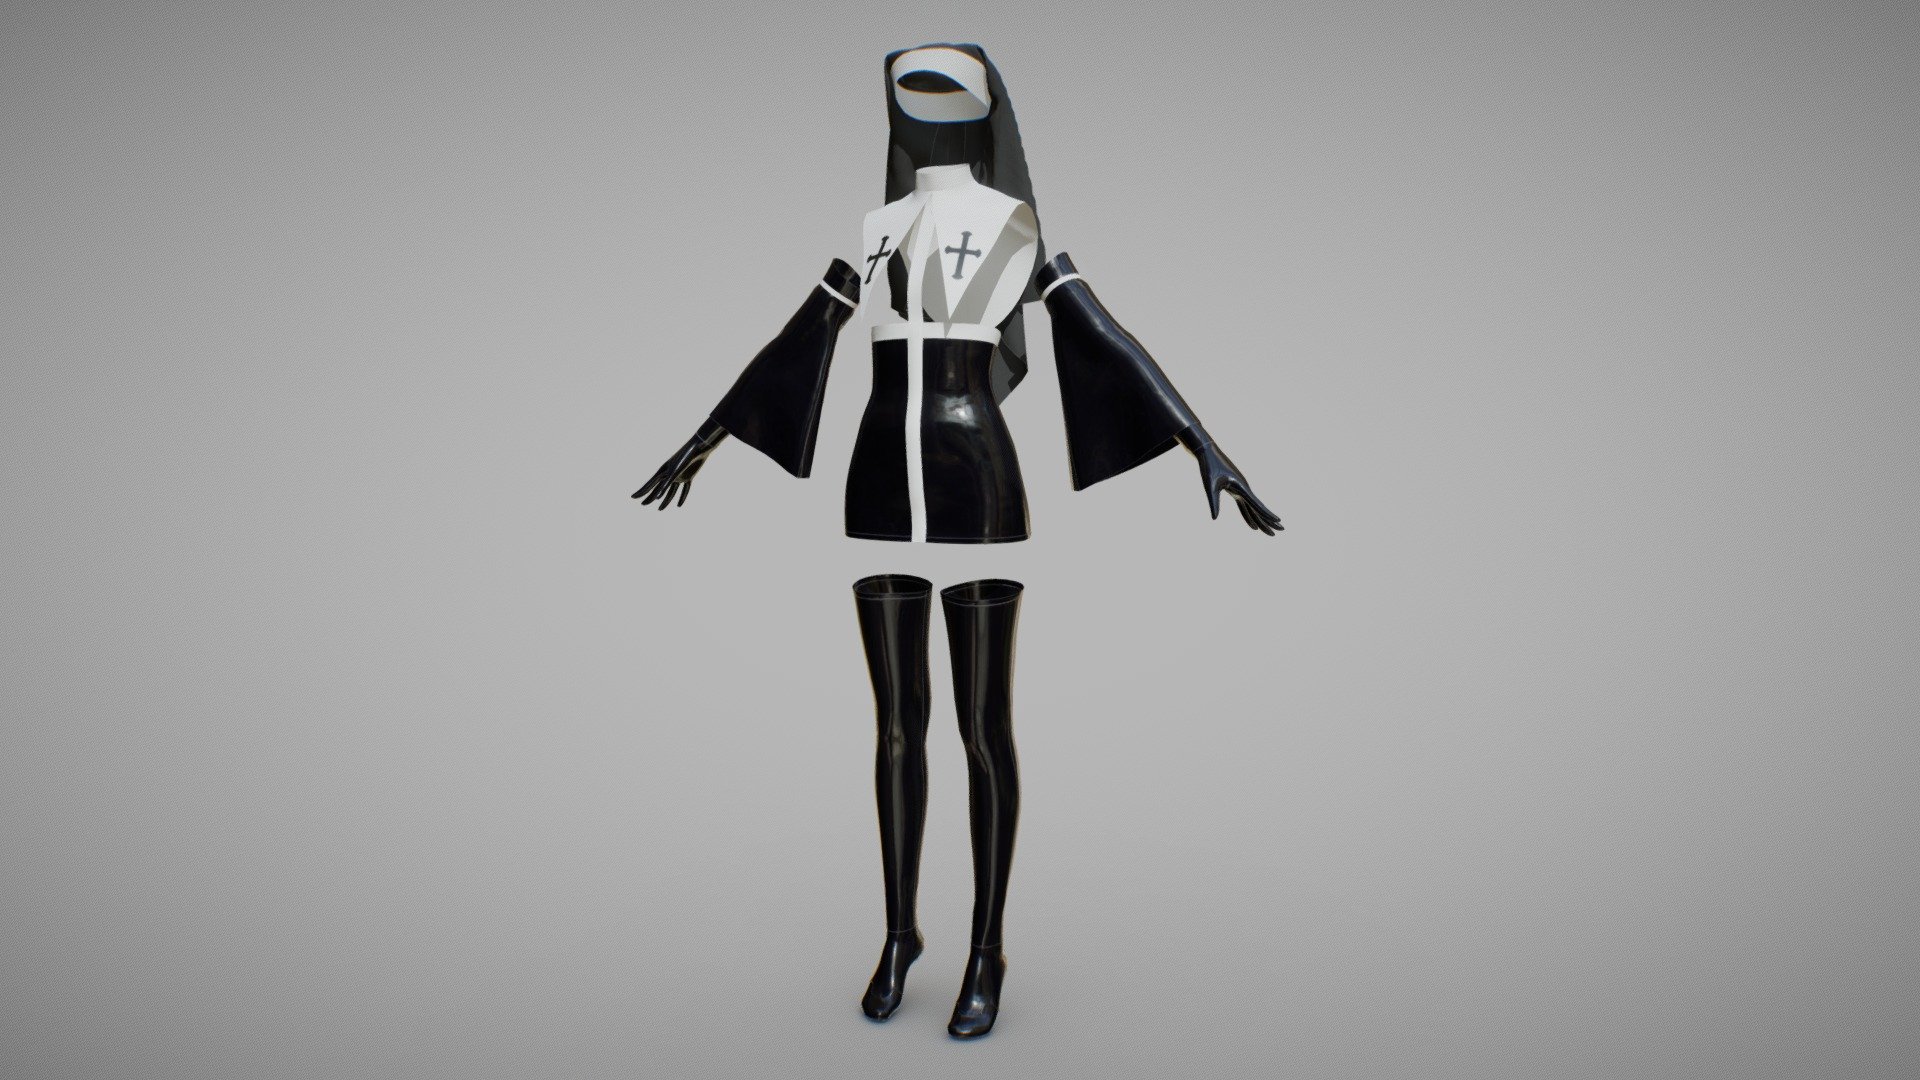 Nun full costume set by SoulSnatch Store (Real store you can find @soulsnatch.store IG) made of Latex.
Dress, head set, stockings and panties included.
All quad and subdiv ready.
2 sets of 4k PBR textures.
All Quads!
FBX. OBJ. DAE. GLB. BLEND. formats.
Enjoy ;) - BDSM latex Nun costume set by SoulSnatch Store - Buy Royalty Free 3D model by DeepDown 3d model